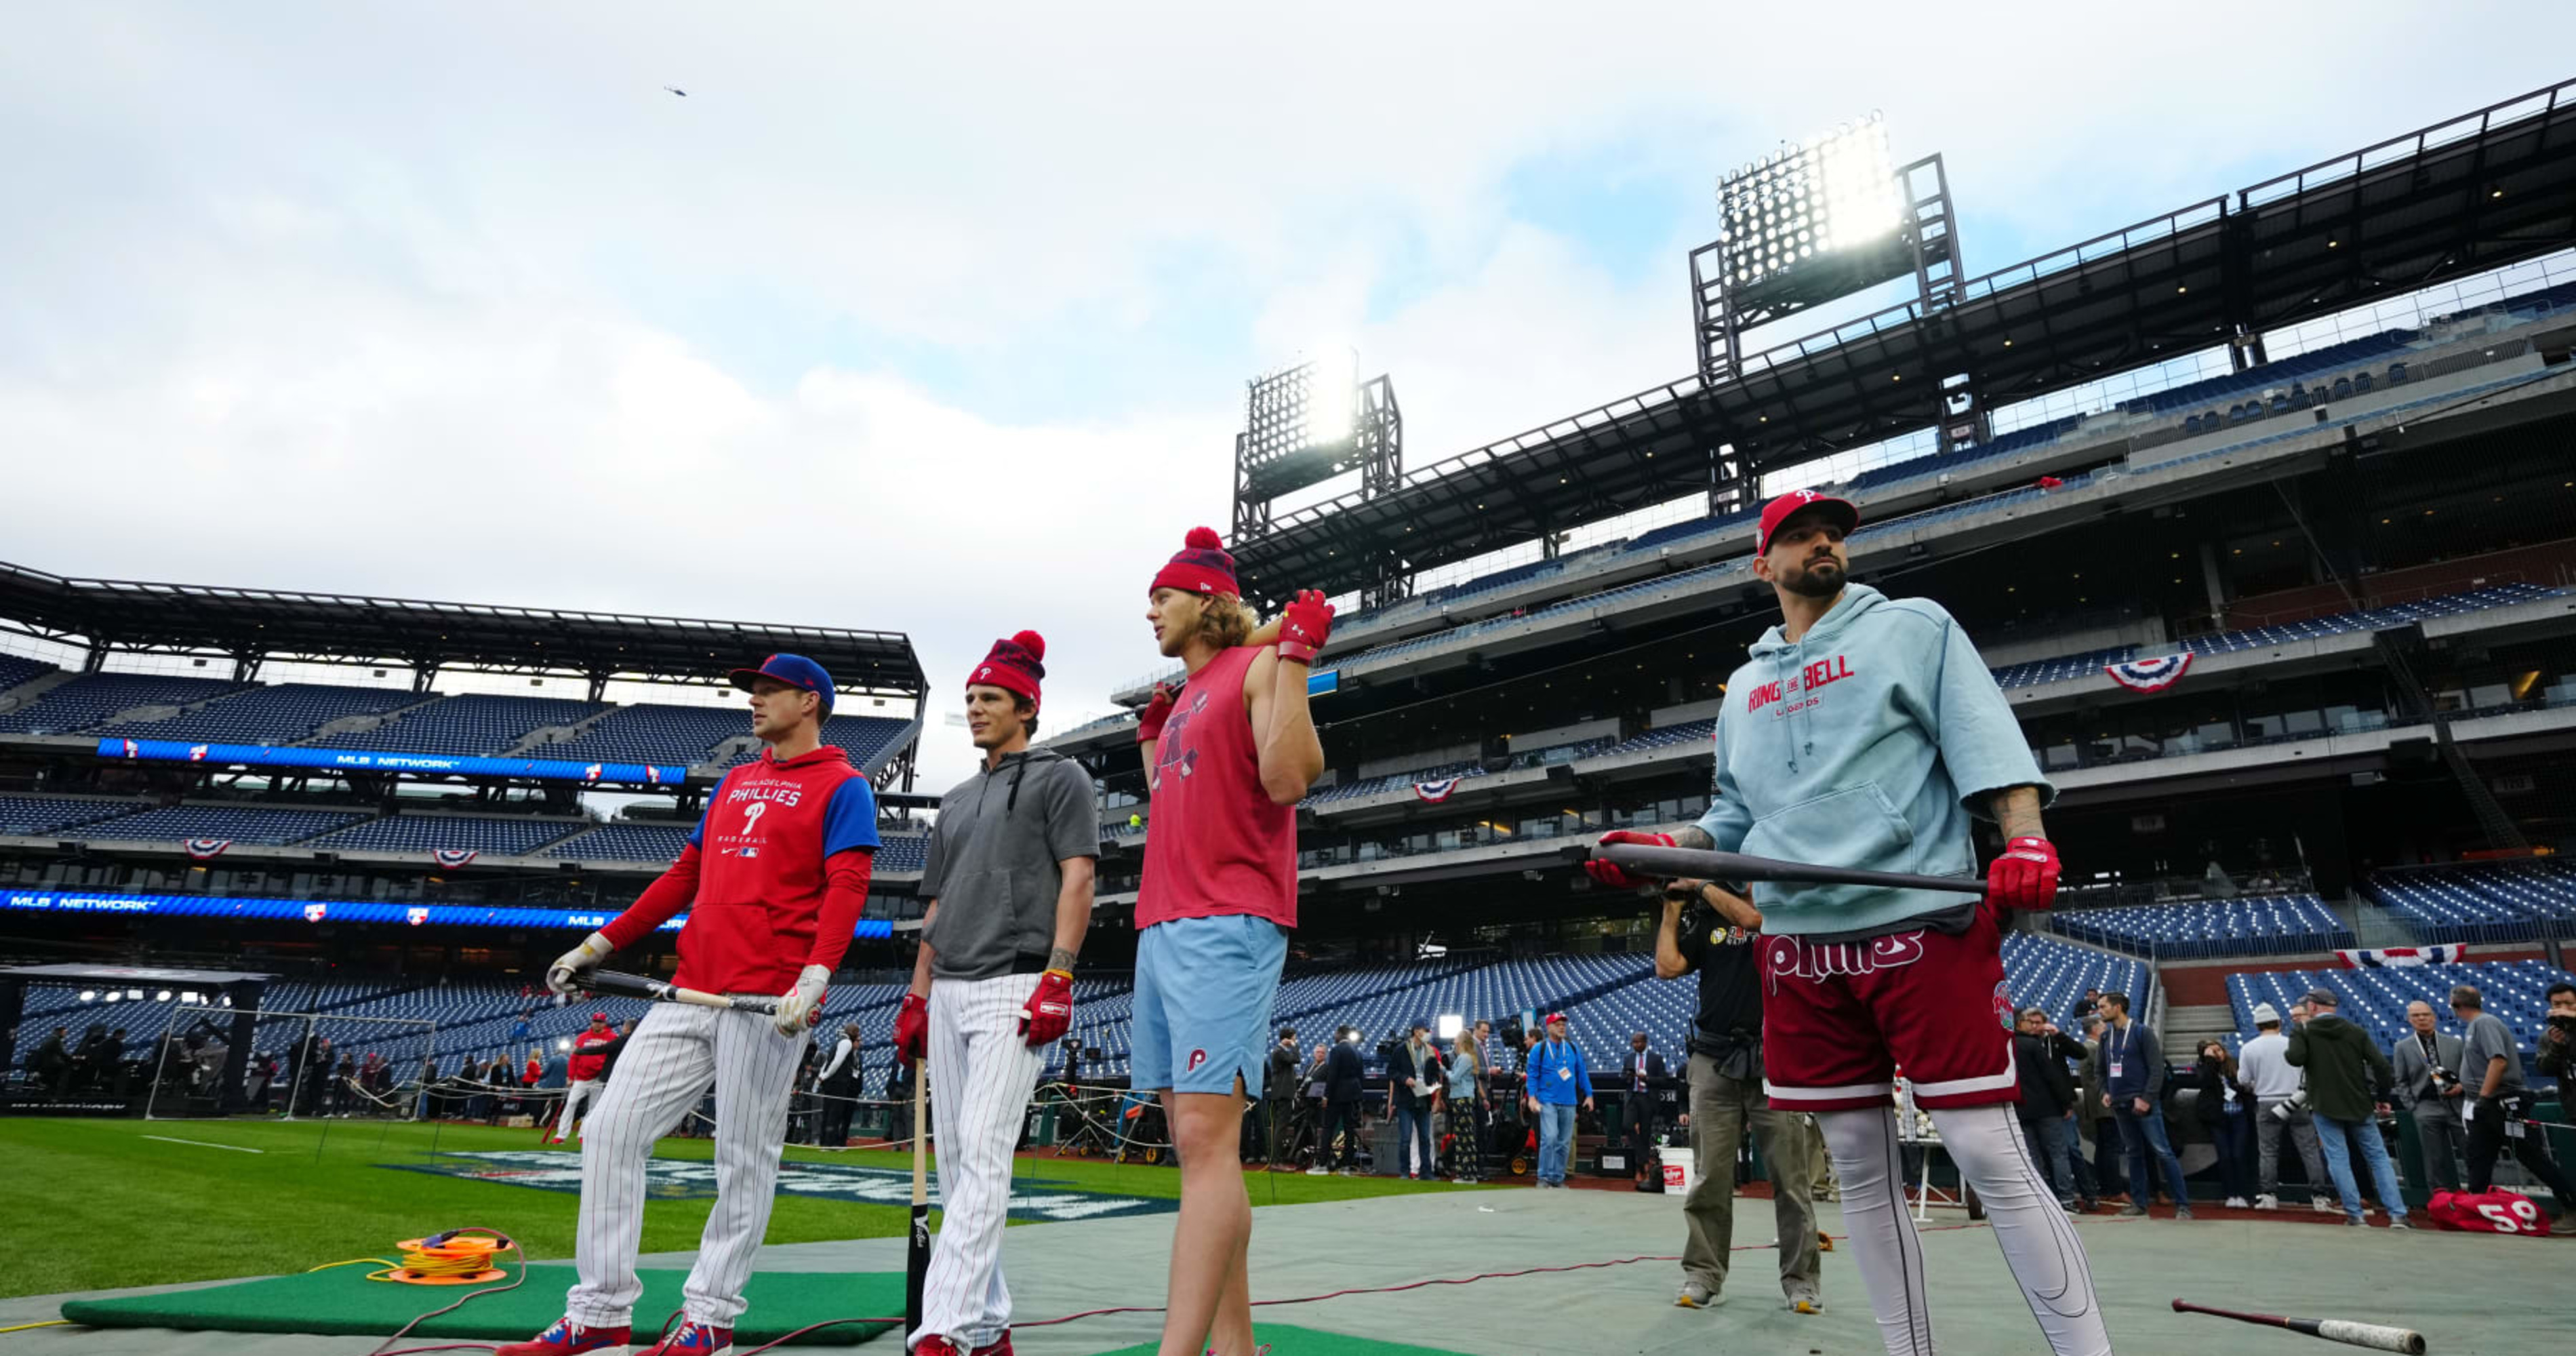 Game 3 postponement means changes to Phillies' World Series pitching plans  - The Boston Globe